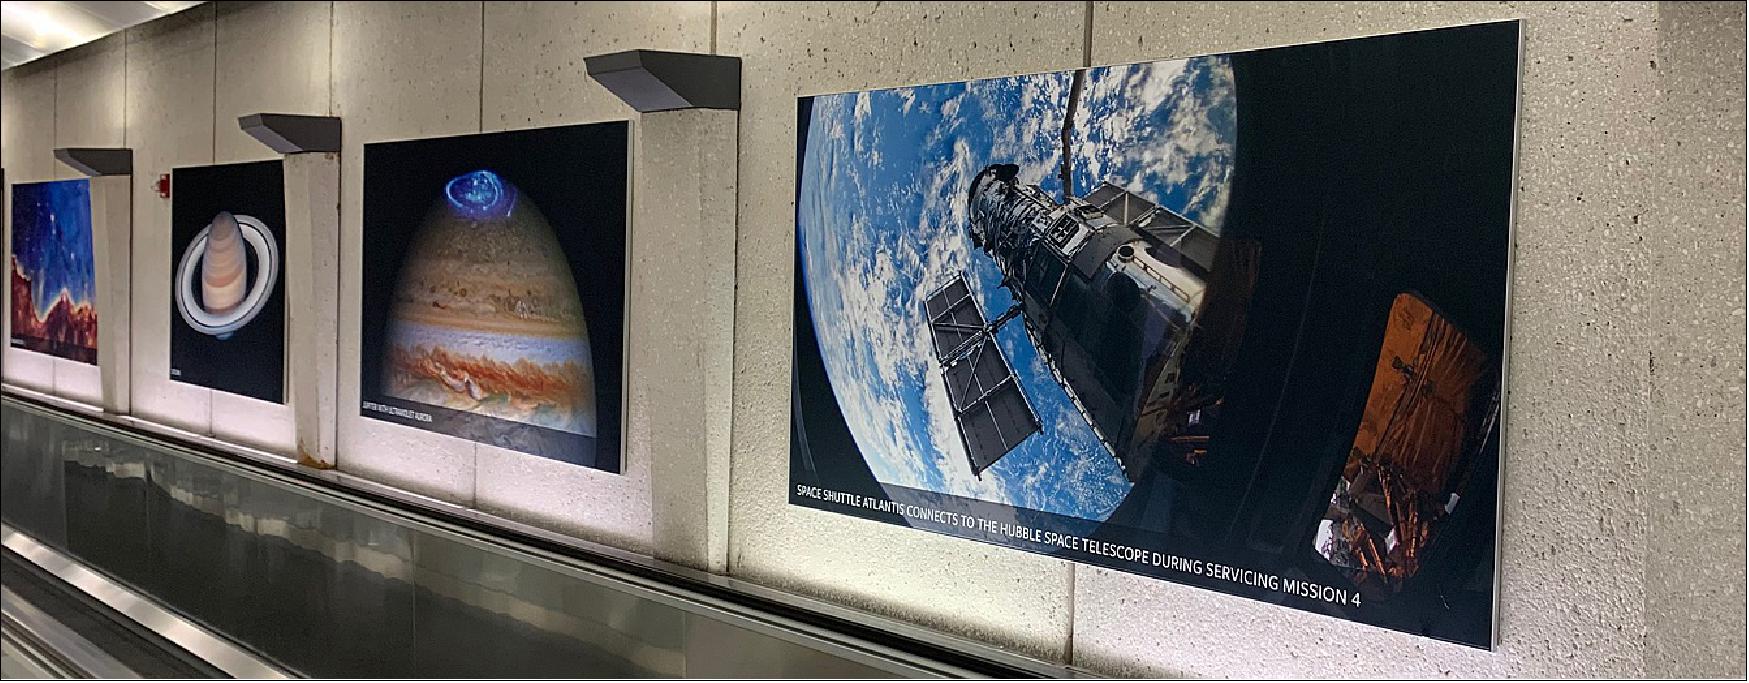 Figure 2: The new "Hubble Hallway" on display at the Washington Dulles International Airport features images and spectra spanning the breadth of Hubble science, from the local cosmic neighborhood of our solar system, to planets orbiting other stars, to colorful nebulas and distant galaxies in the first eons of the universe. The exhibit lines a section of the walls of the 300-foot-long hallway between Dulles' main terminal and the airport's parking garages and future Metrorail stop (image credit: STScI)